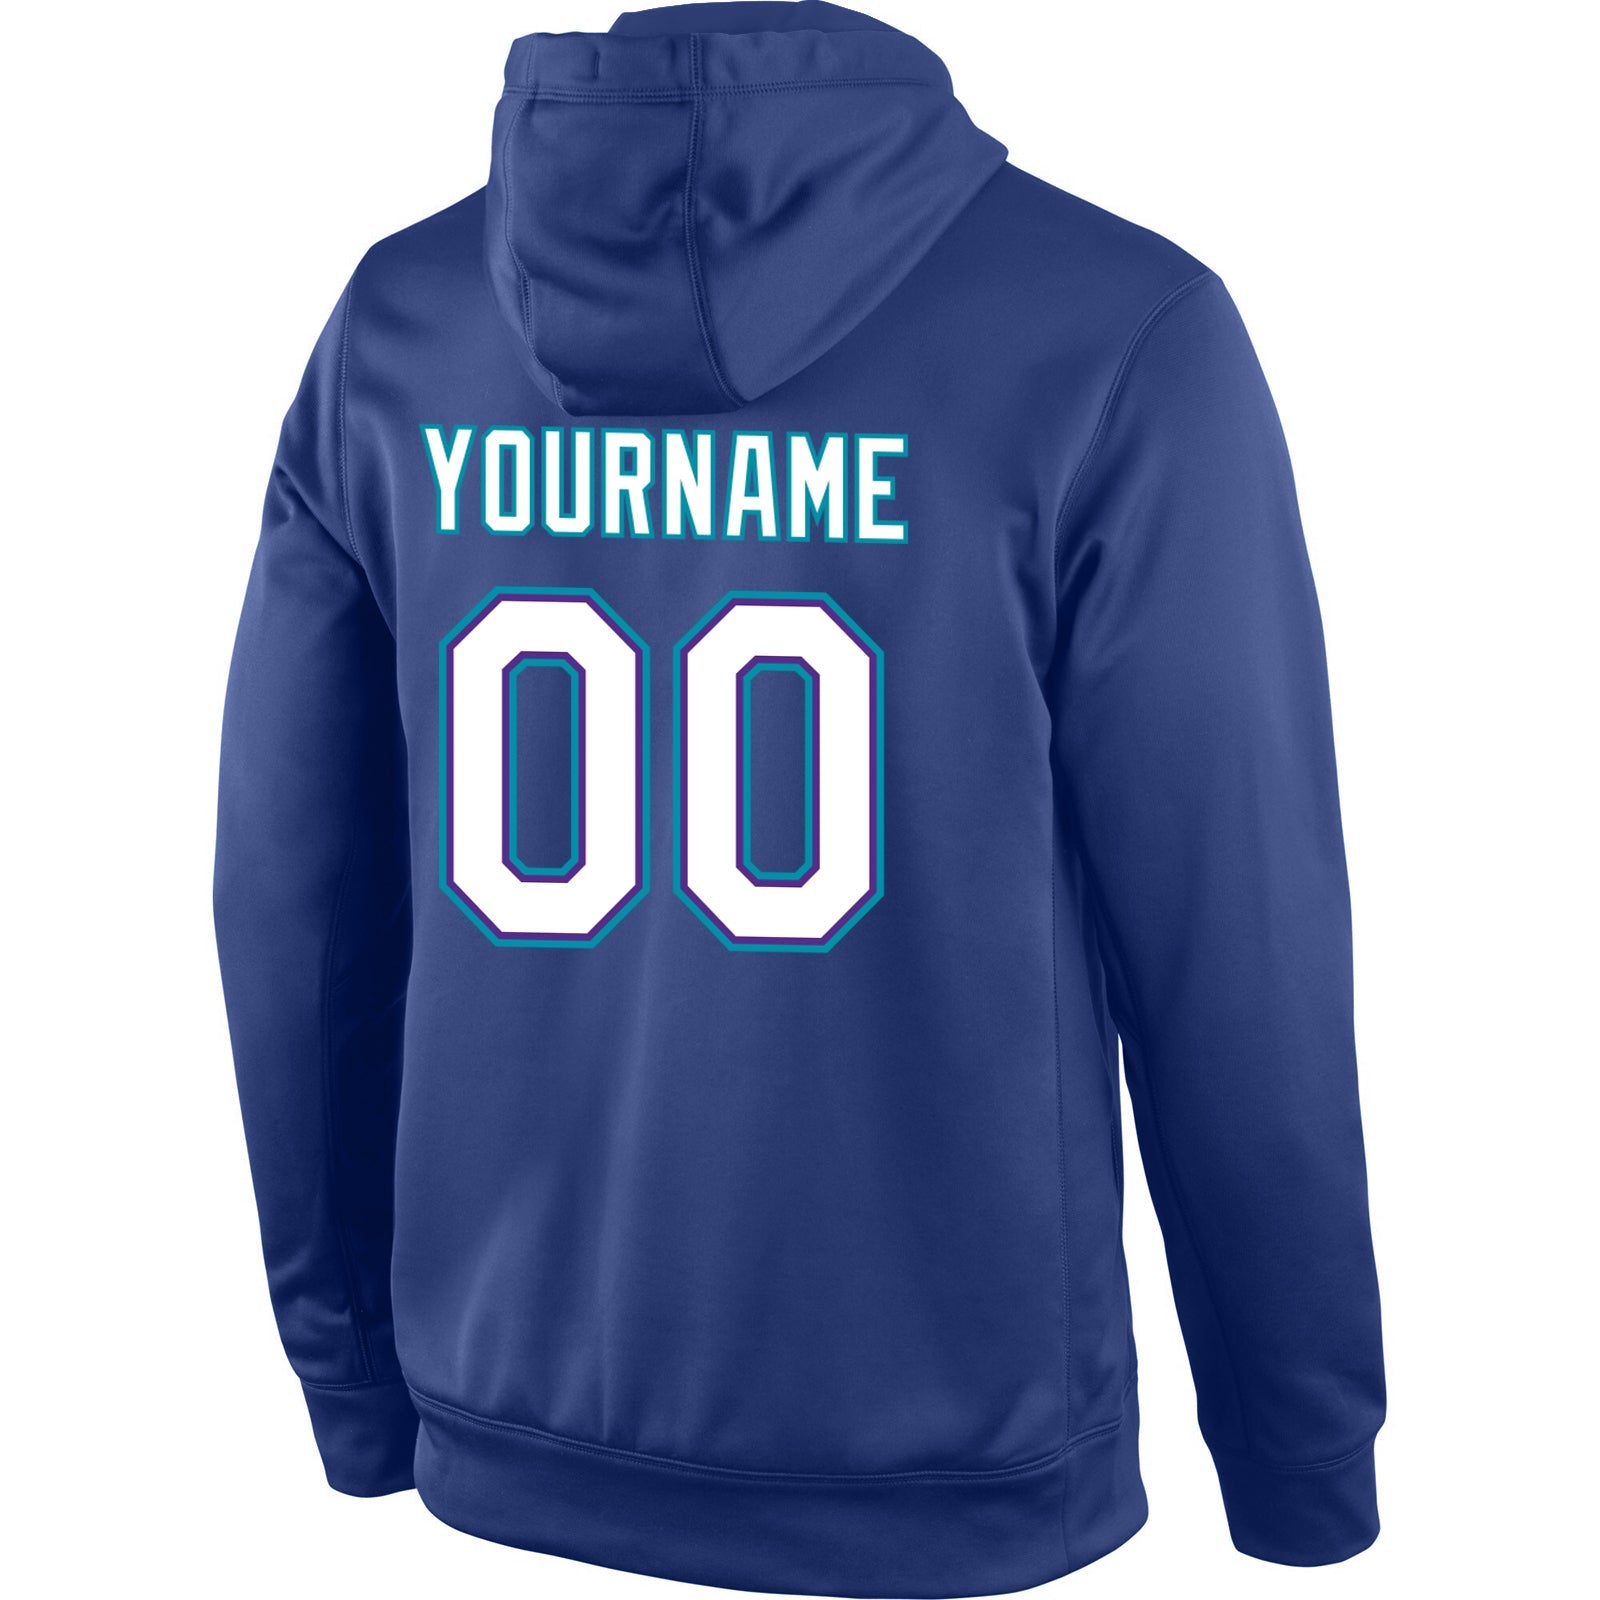 Custom Stitched Royal White-Teal Sports Pullover Sweatshirt Hoodie